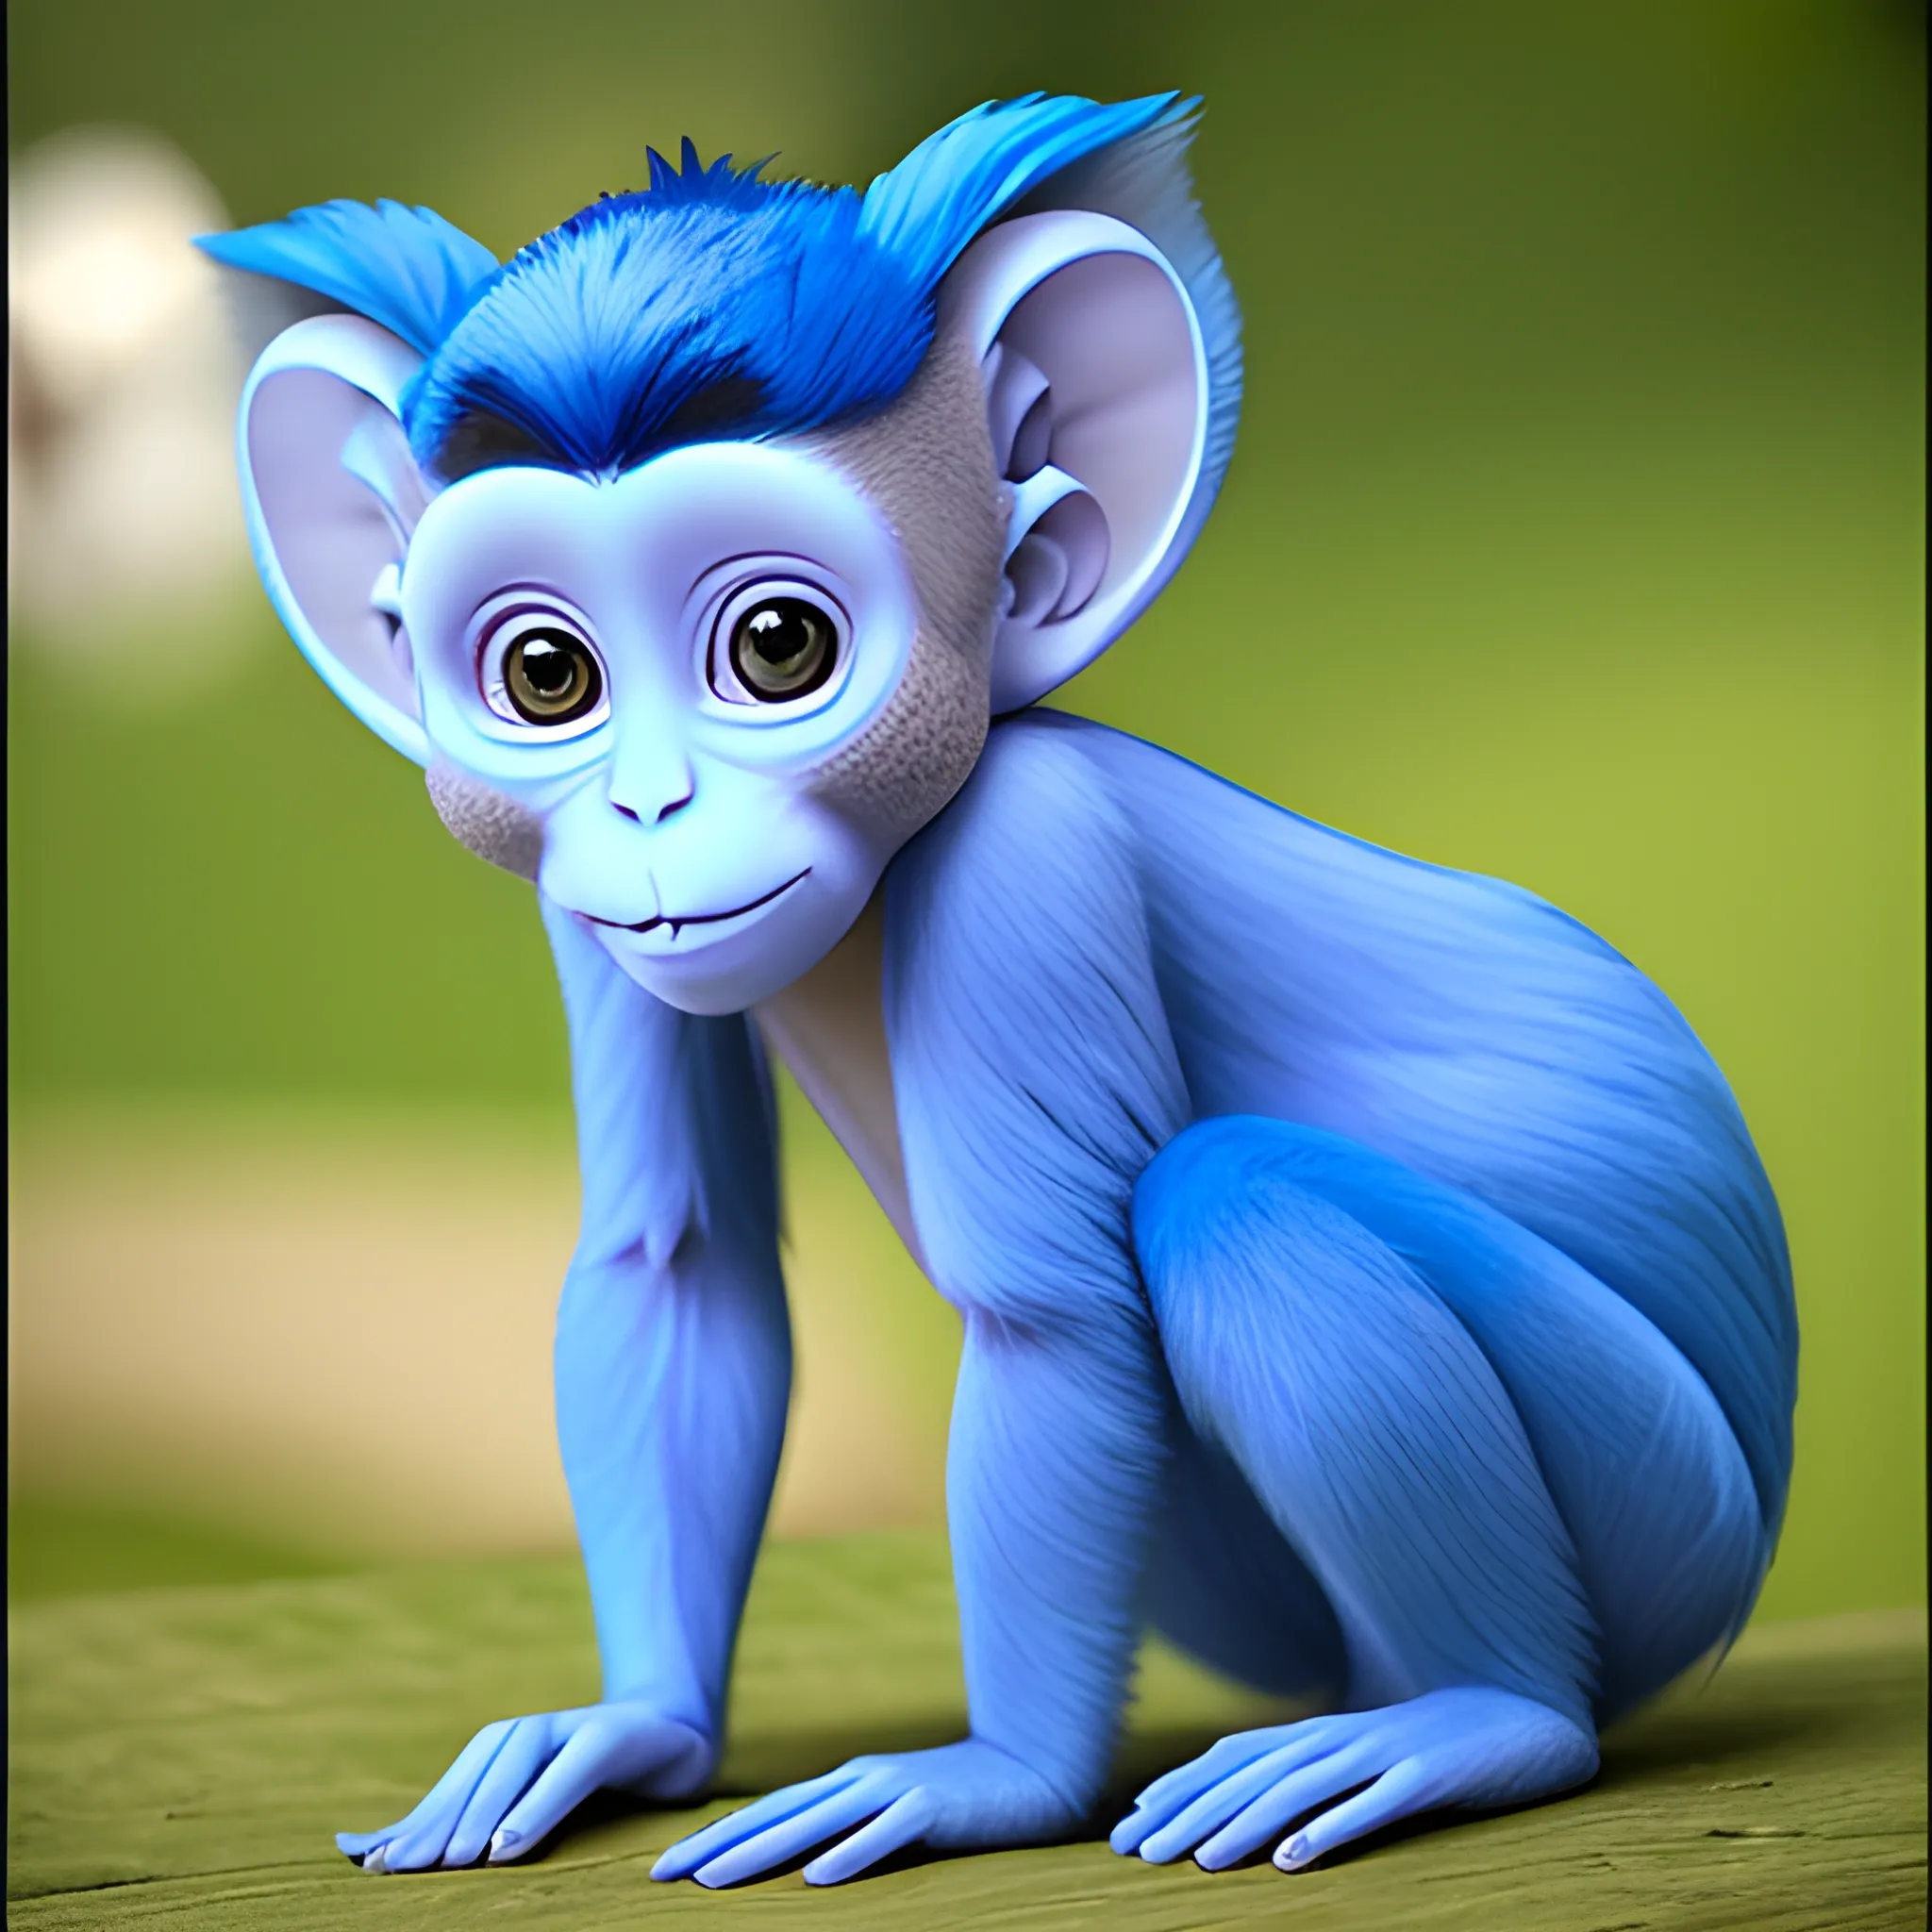 A blue rabbit monkey with a tail named riggy 